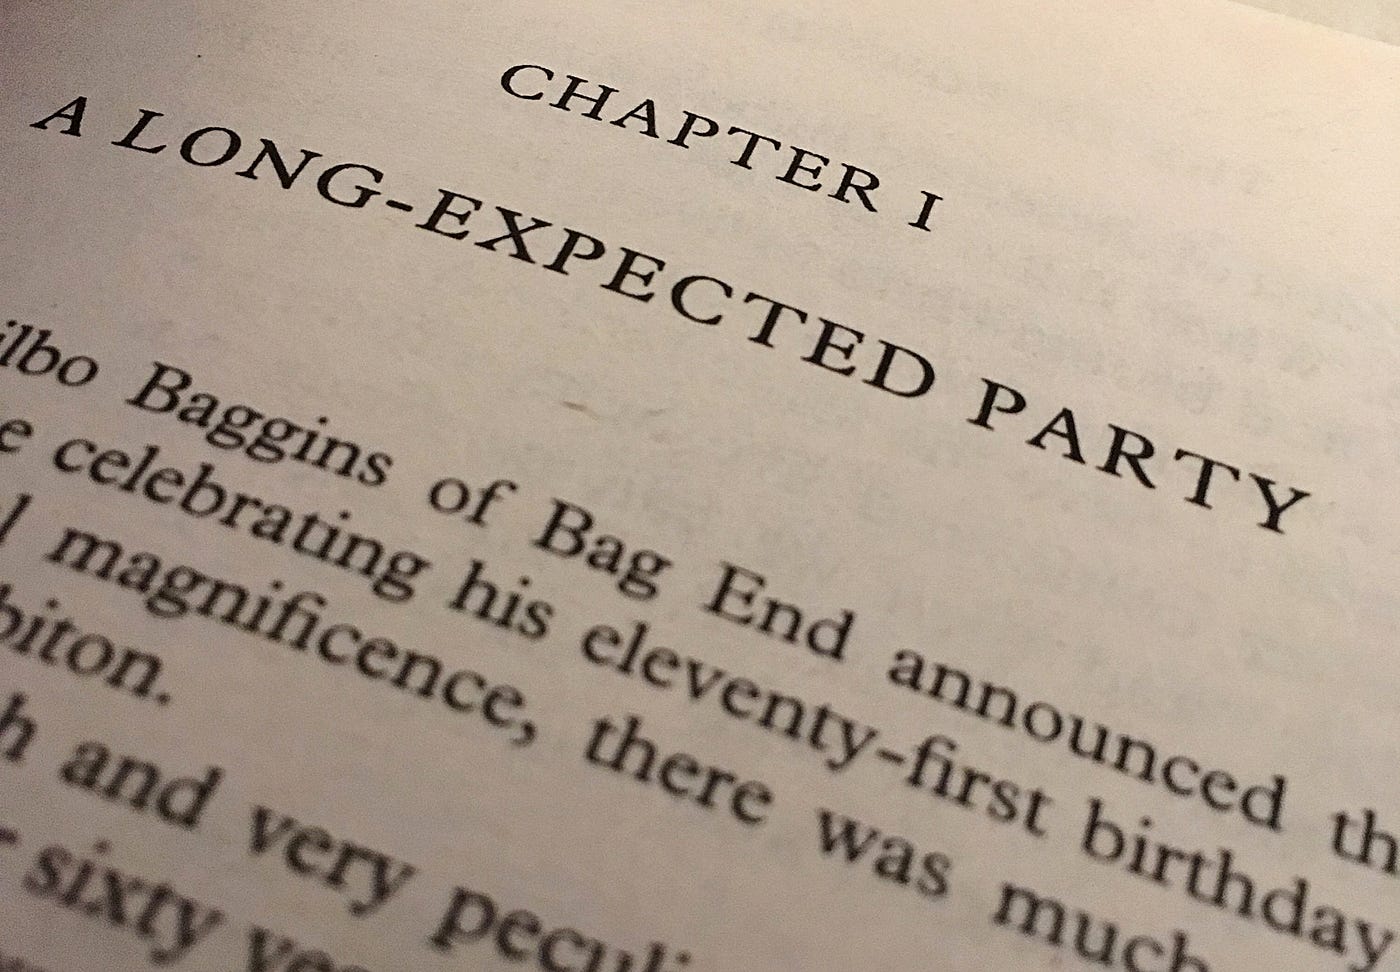 Chapter 1: A Long-expected Party. From unexpected to long-expected, by  Matthew Civico